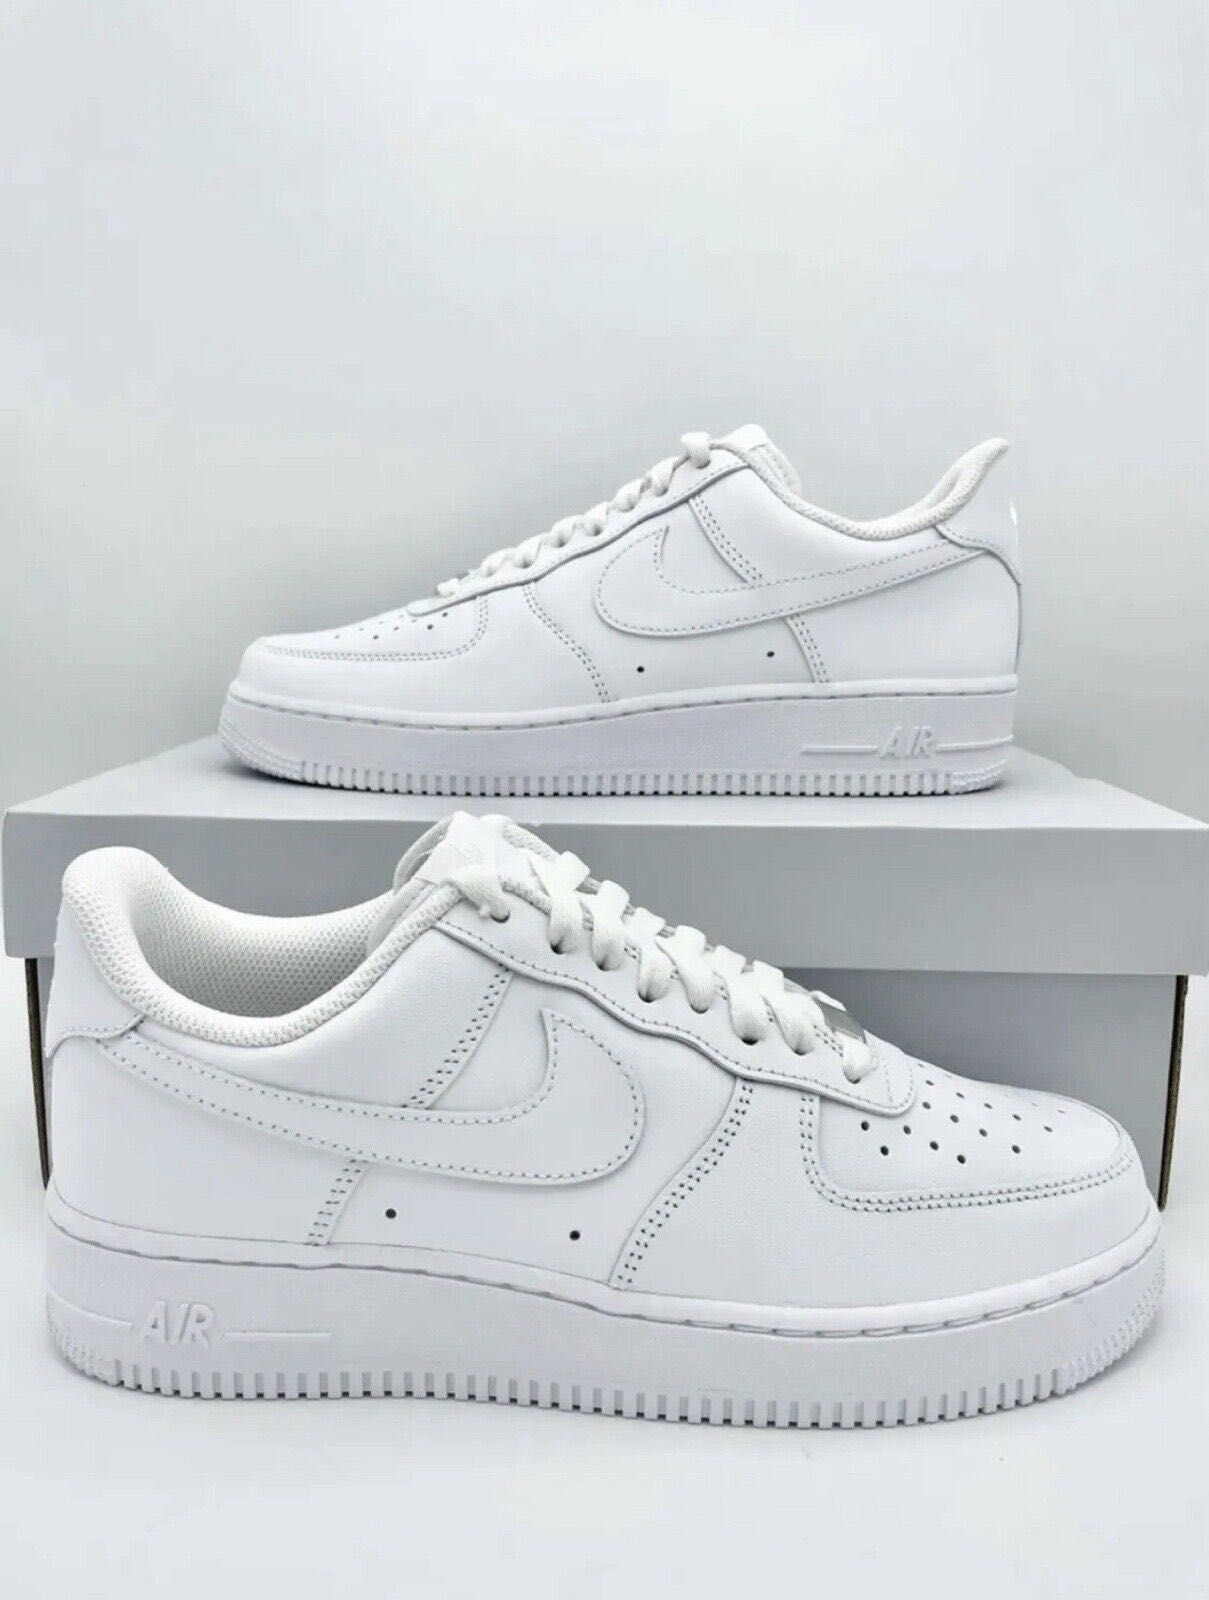 Nike Air Force 1 '07 Low Triple White Adidasi Unisex NEW - DISCOUNT